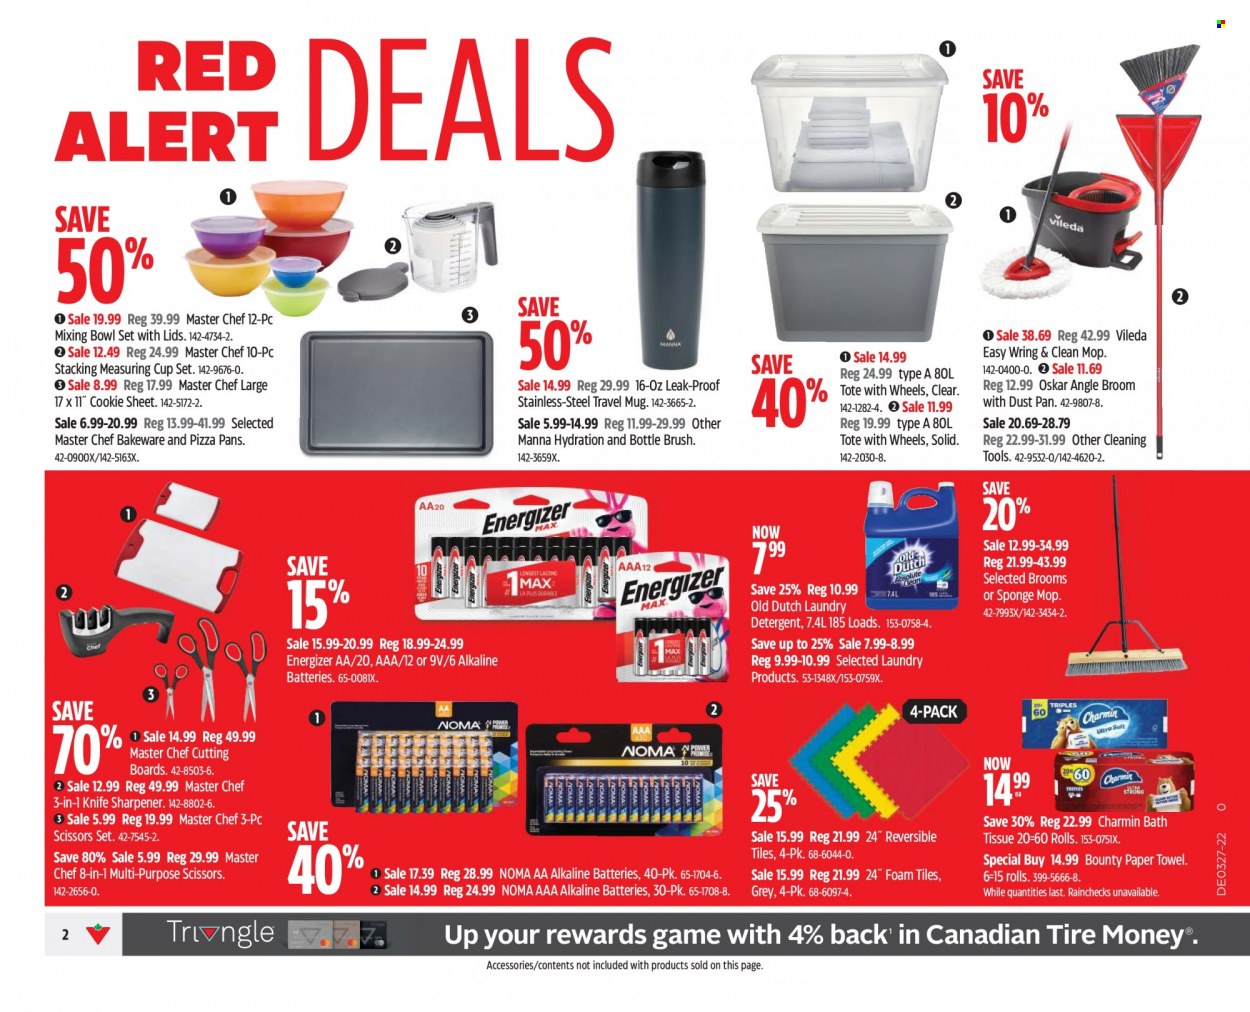 thumbnail - Canadian Tire Flyer - July 01, 2022 - July 07, 2022 - Sales products - bath tissue, Bounty, paper towels, Charmin, laundry detergent, knife, Vileda, cleaning tools, mop, broom, angle broom, mixing bowl, mug, sharpener, travel mug, bowl set, knife sharpener, bowl, measuring cup, bakeware, bottle brush, Manna, scissors, detergent, Energizer. Page 2.